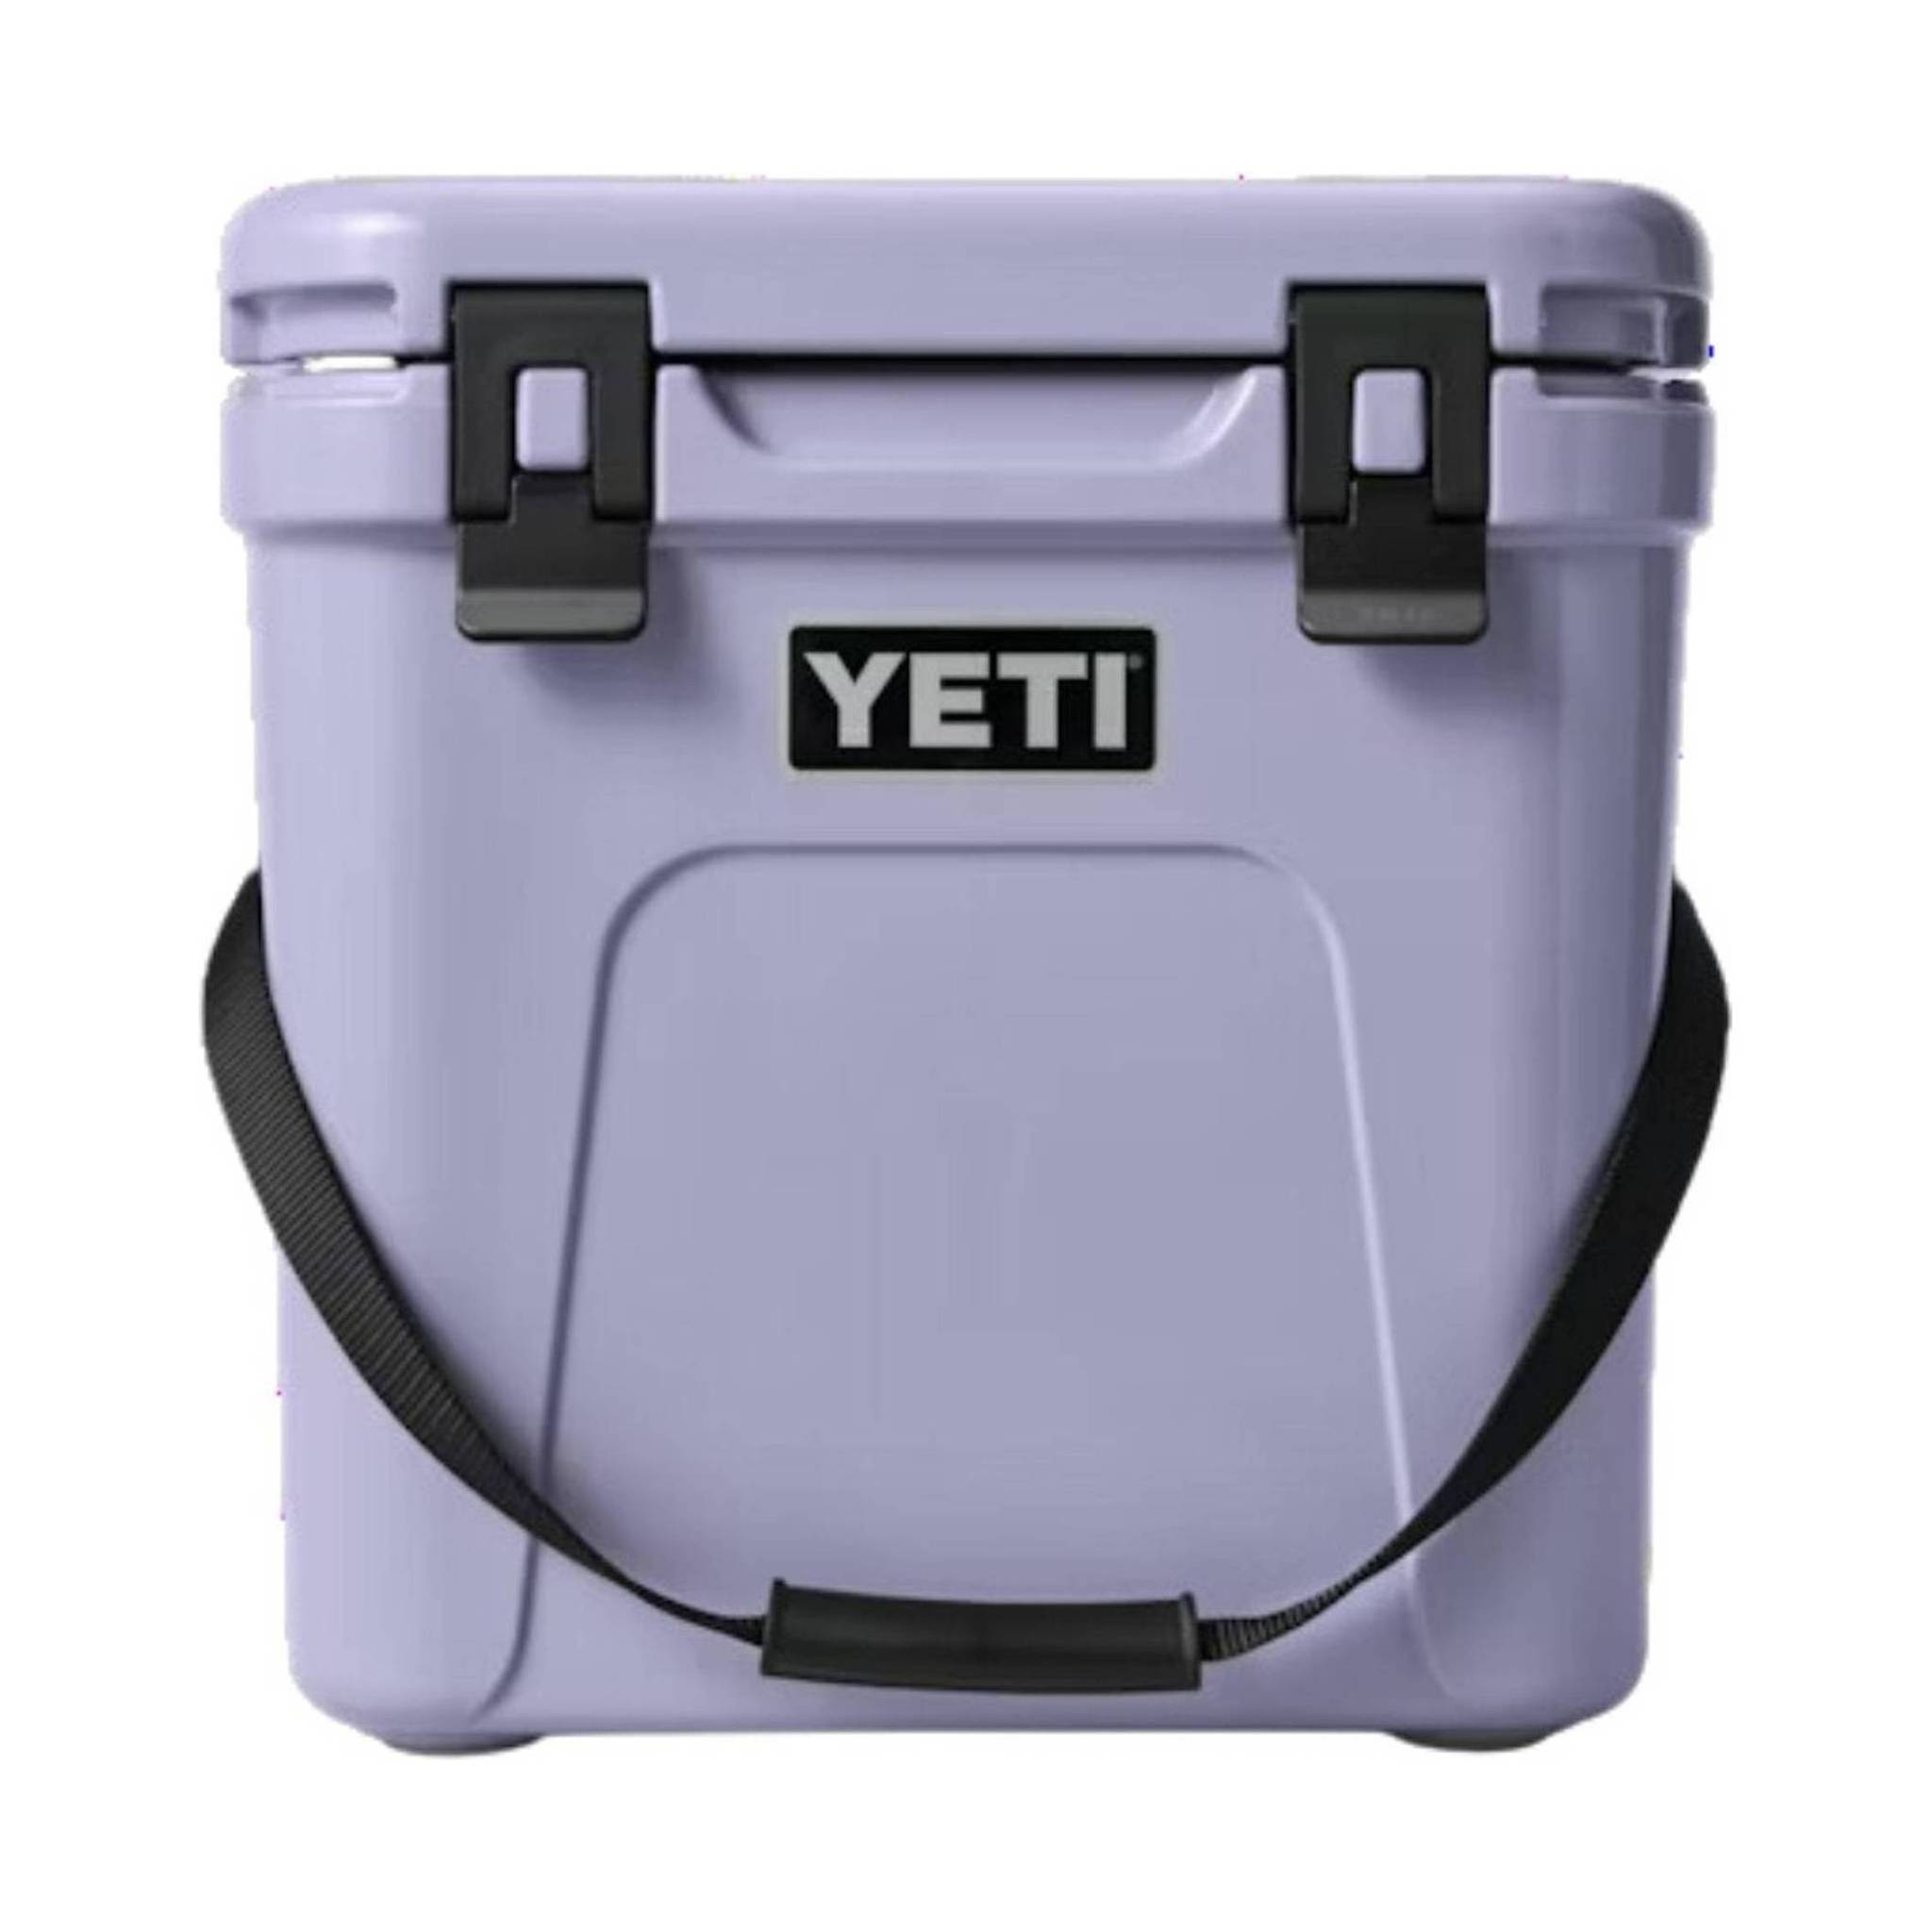 Yeti Outlet Online: Yeti Backpack & Yeti Coolers On Sale